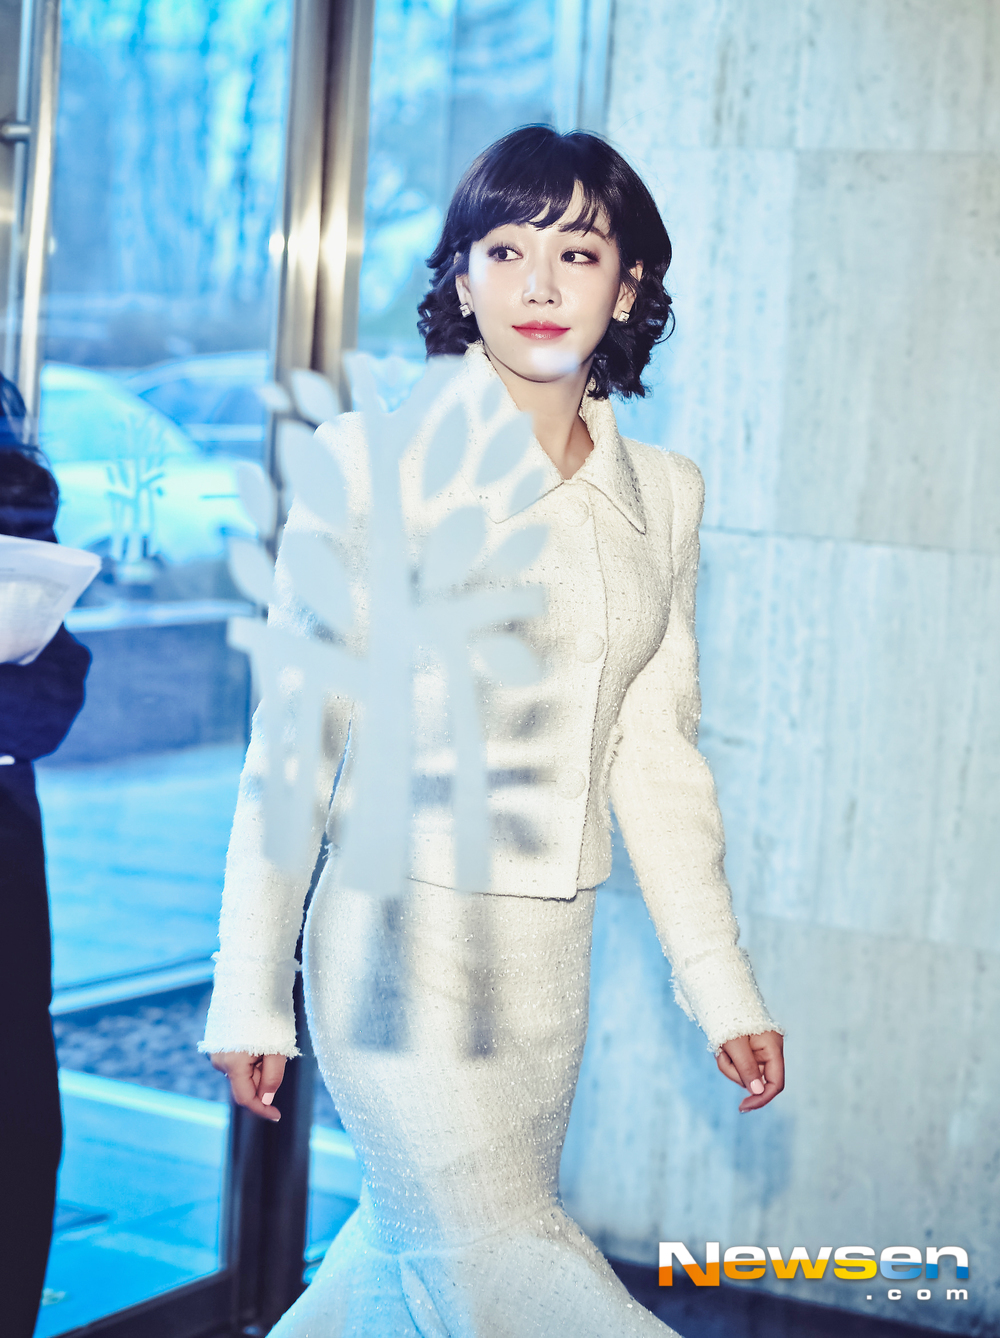 The launch event commemorating the launch of the beauty brand DPC Skin Shot was held at Seoul Banyan Tree Club and Spa Seoul on the afternoon of February 27th.Lee Yoo-ri (DPC exclusive model) is present and poses on the day.Lee Jae-ha